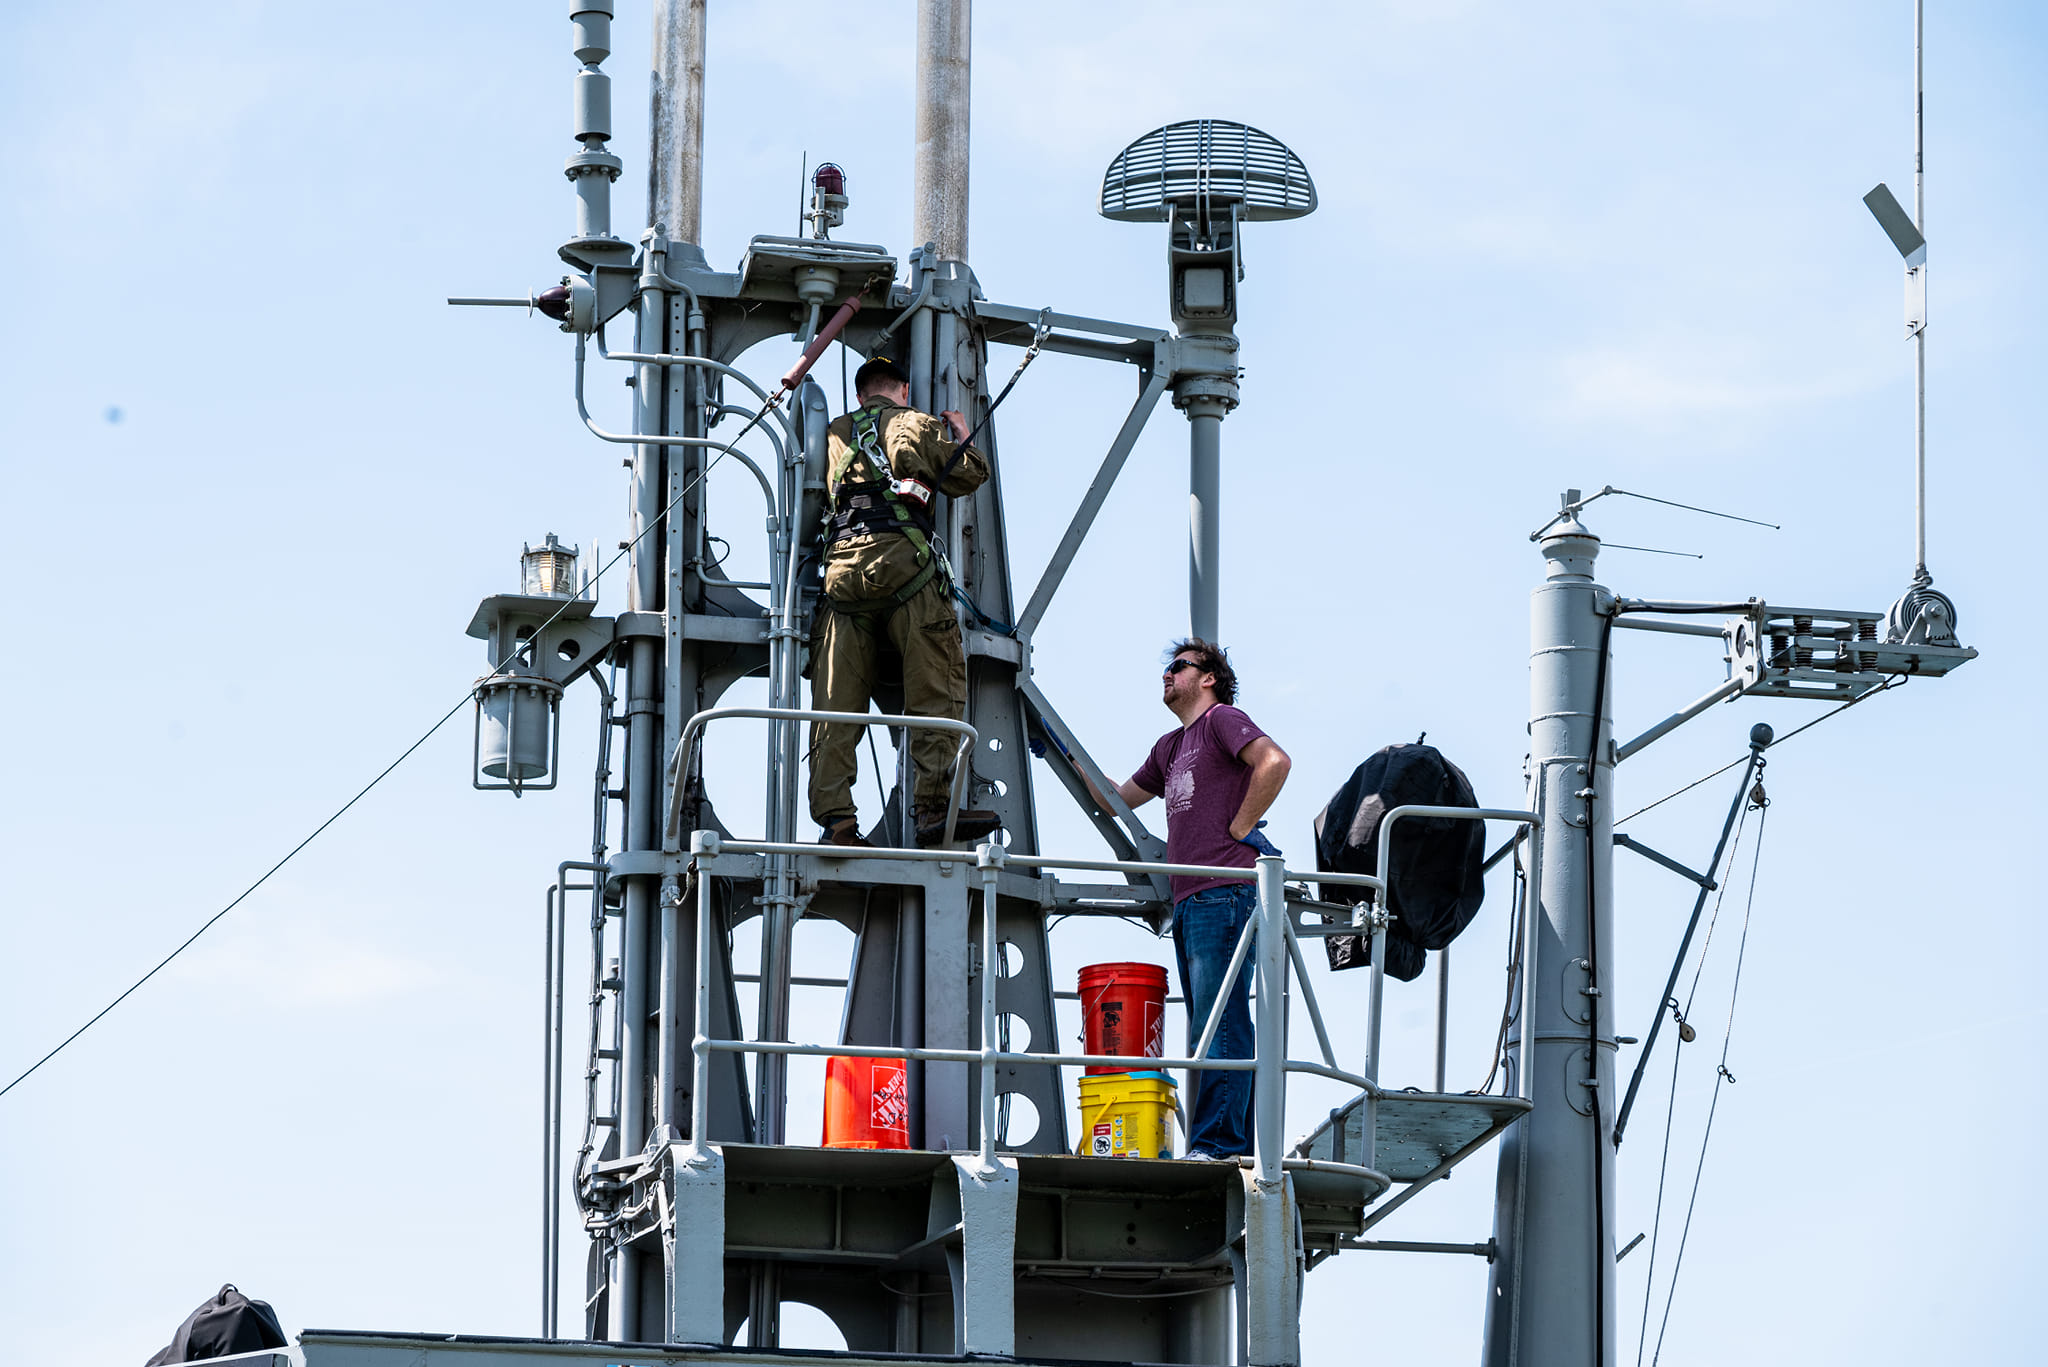 A body harness allows curator Ben Yanke to safely work on the Cod’s periscope.